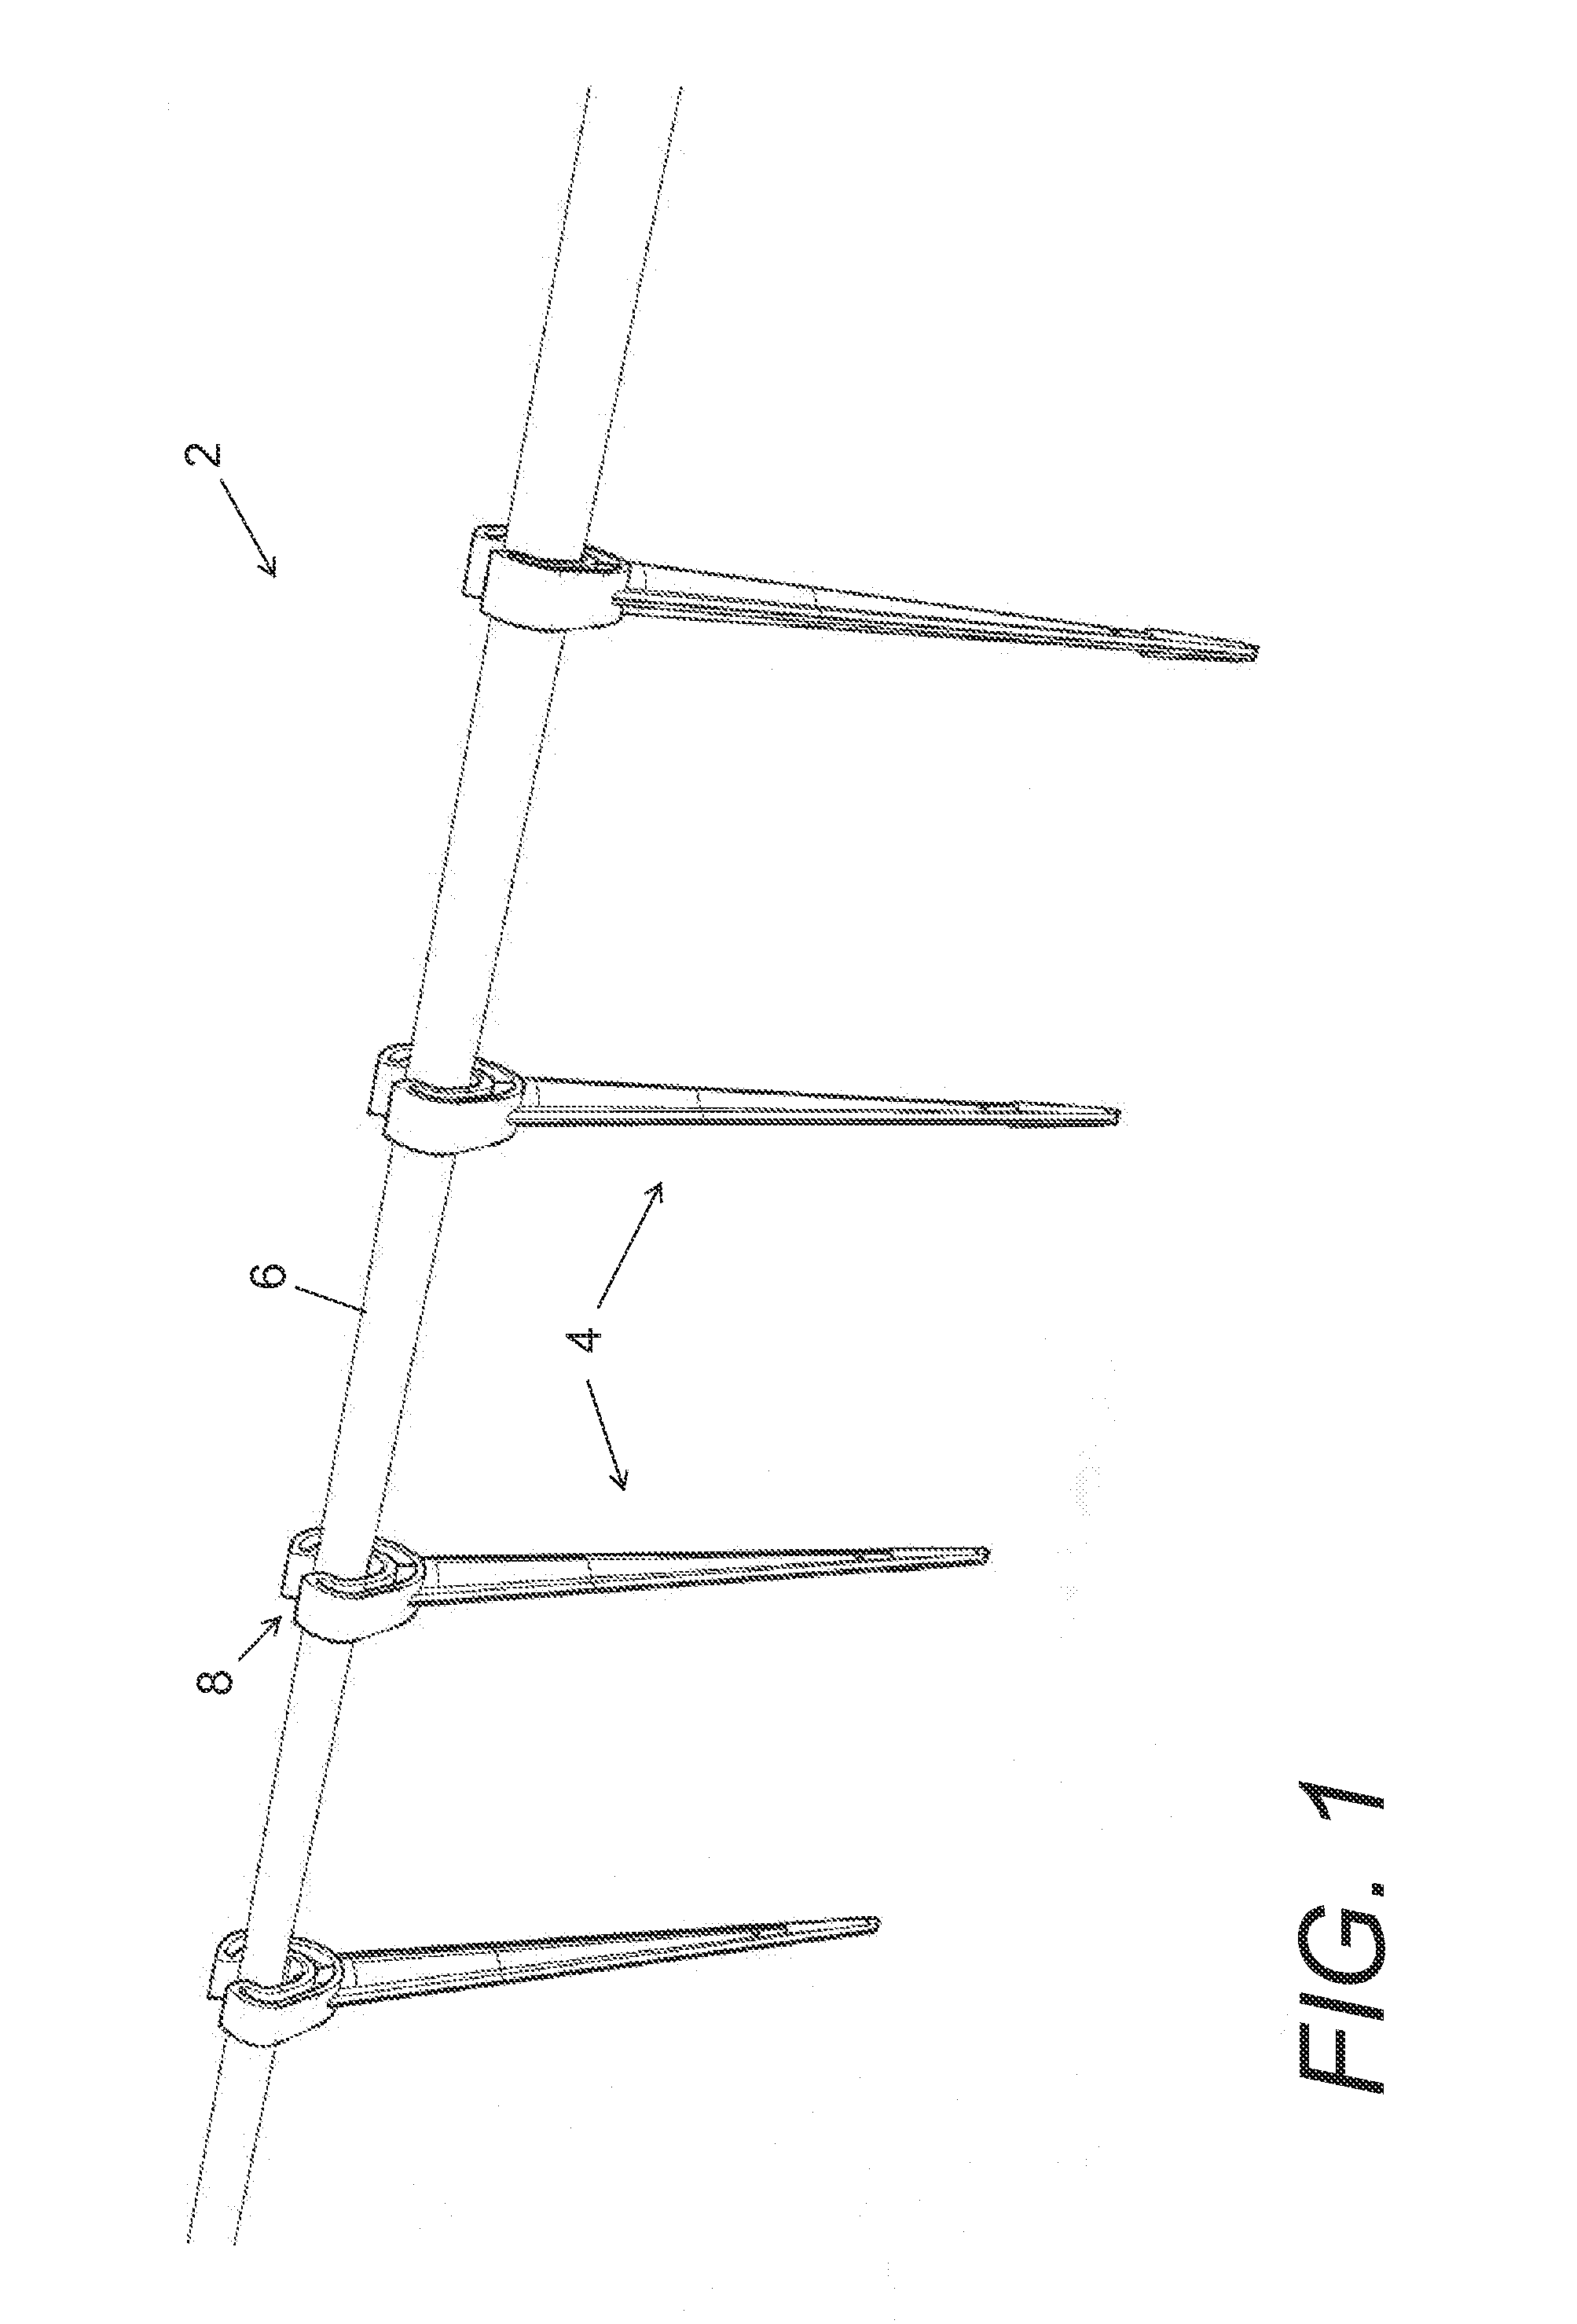 Irrigation spike watering system and method